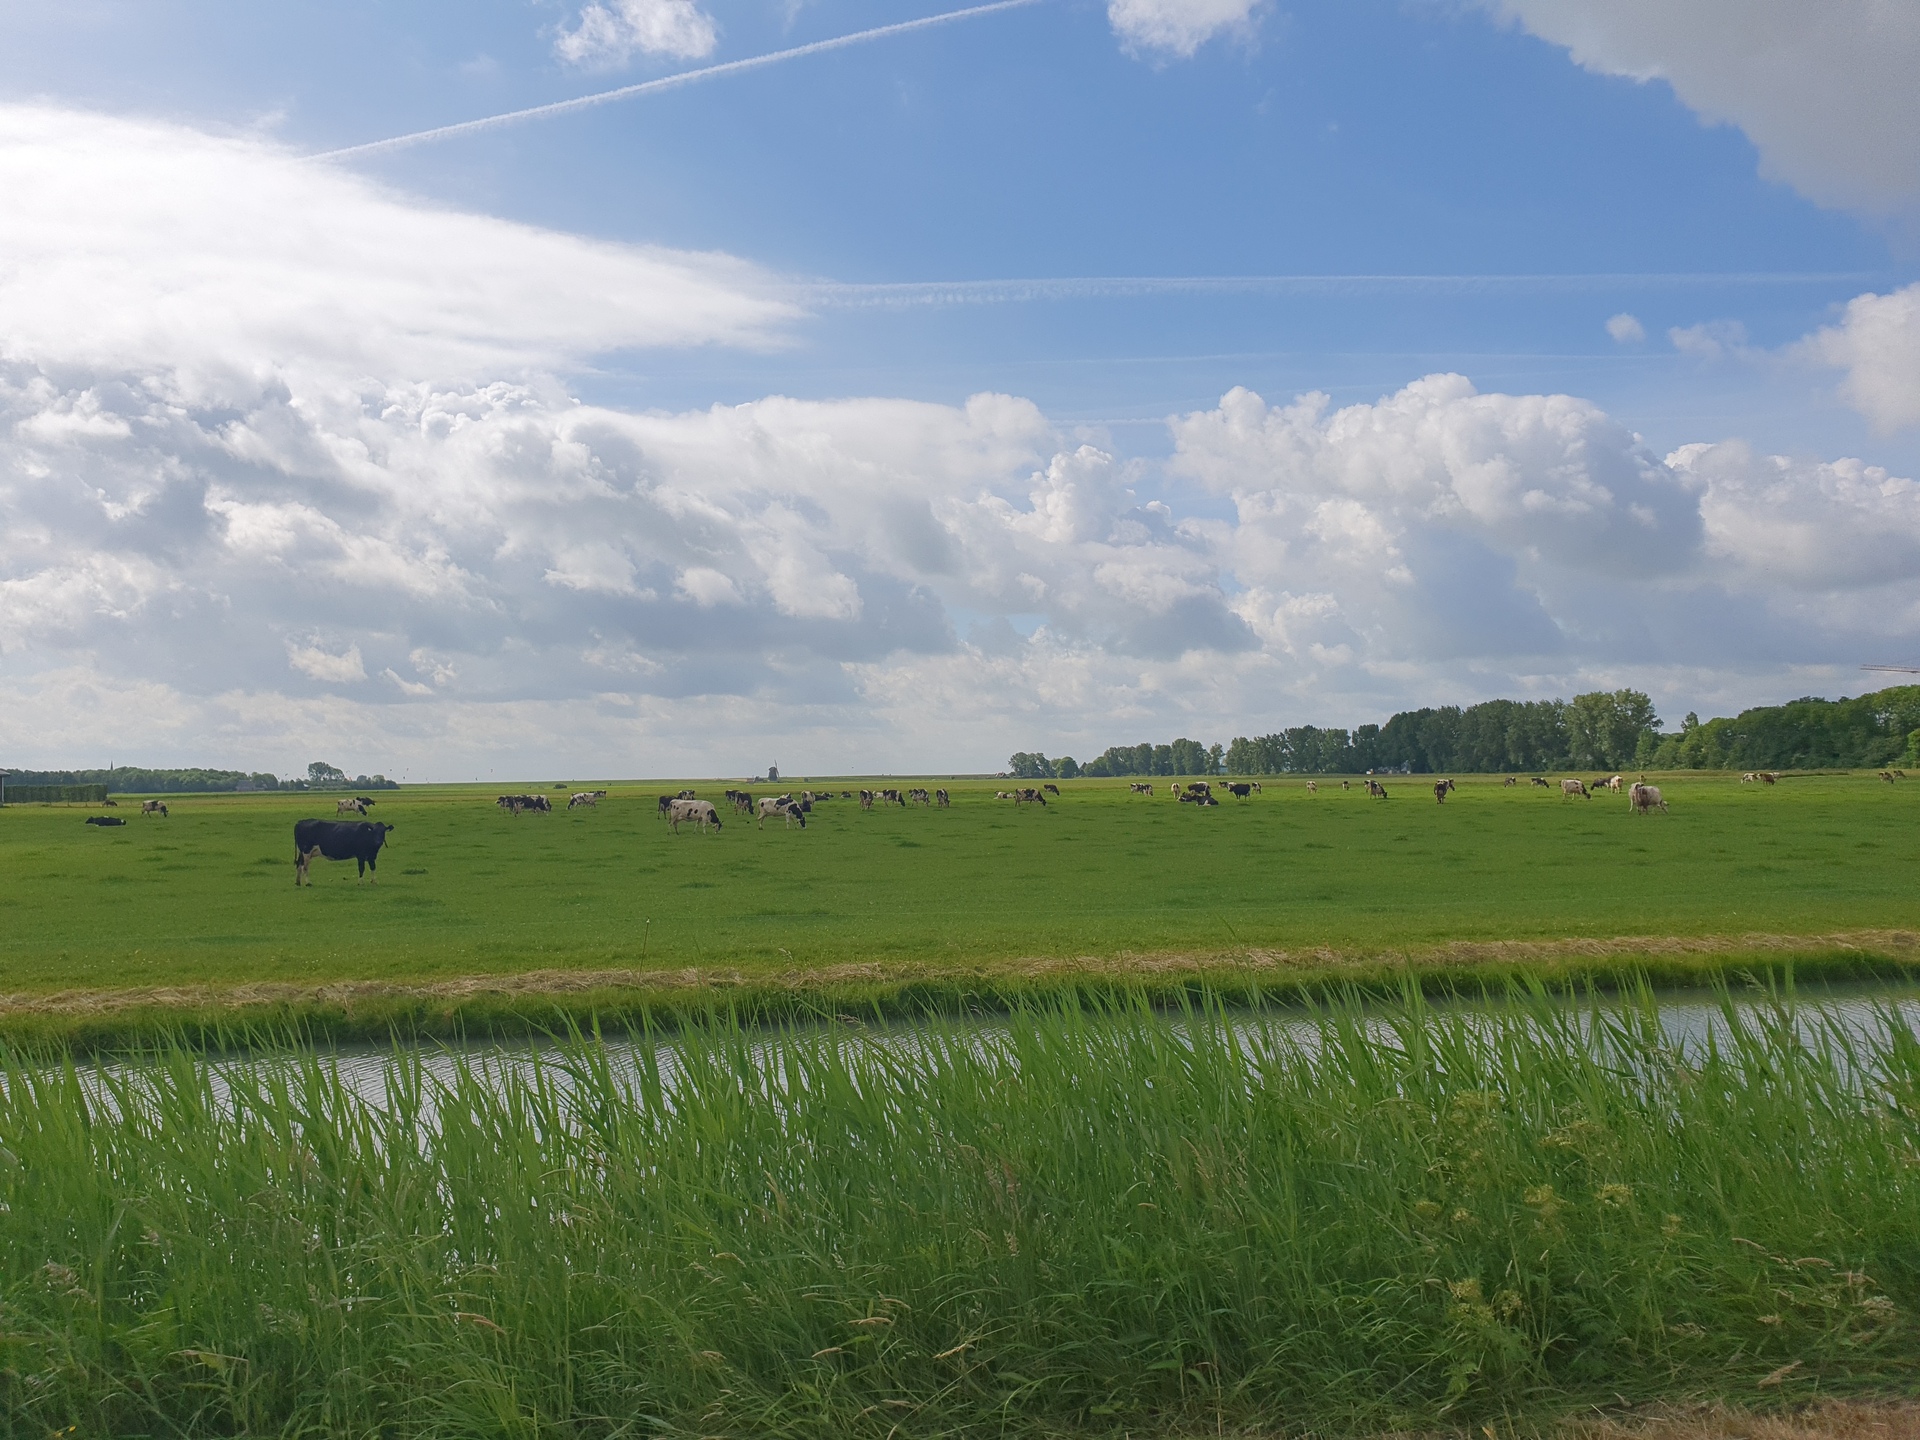 A ditch, a meadow, cows and a wind mill in the background - typically Dutch